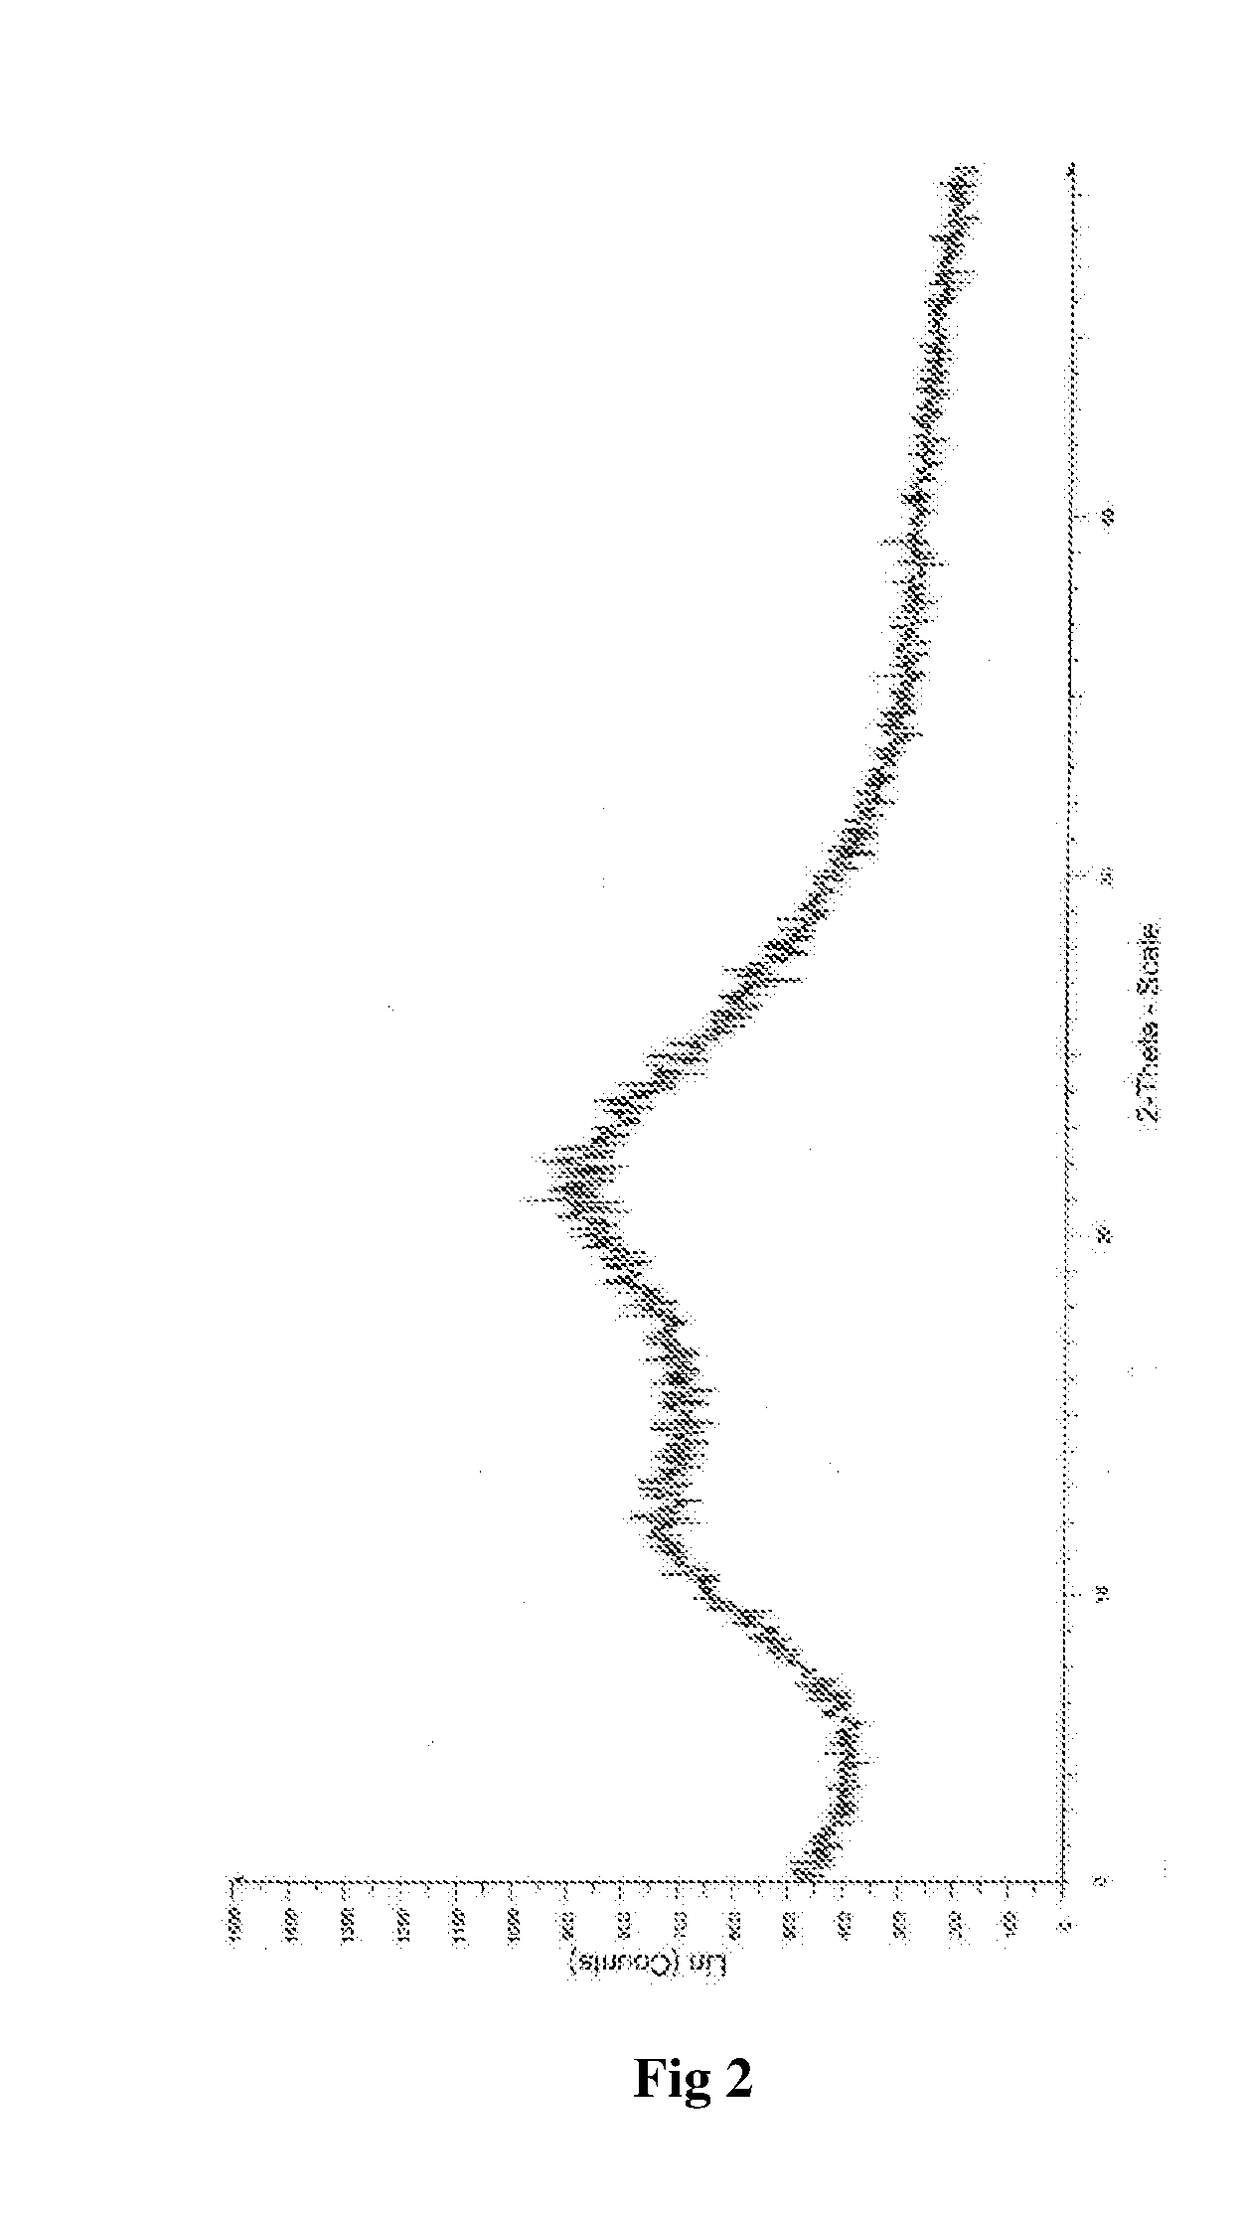 Process for the Preparation of Amorphous Idelalisib and its Premix